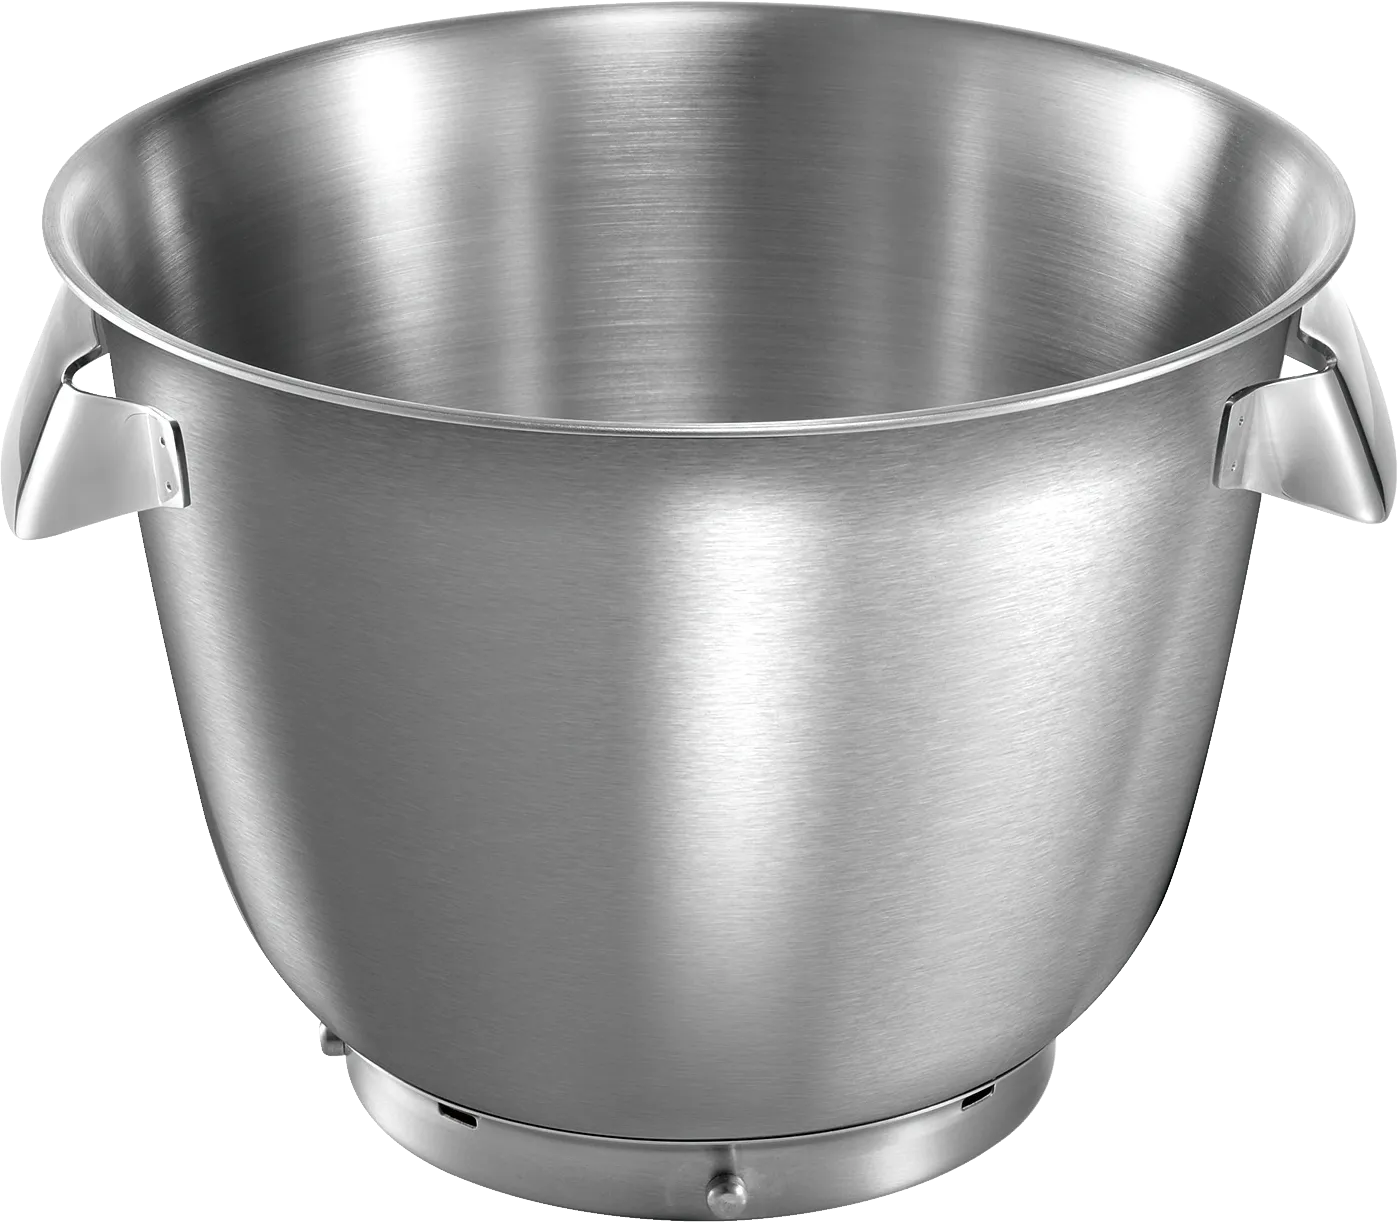 Stainless steel mixing bowl 